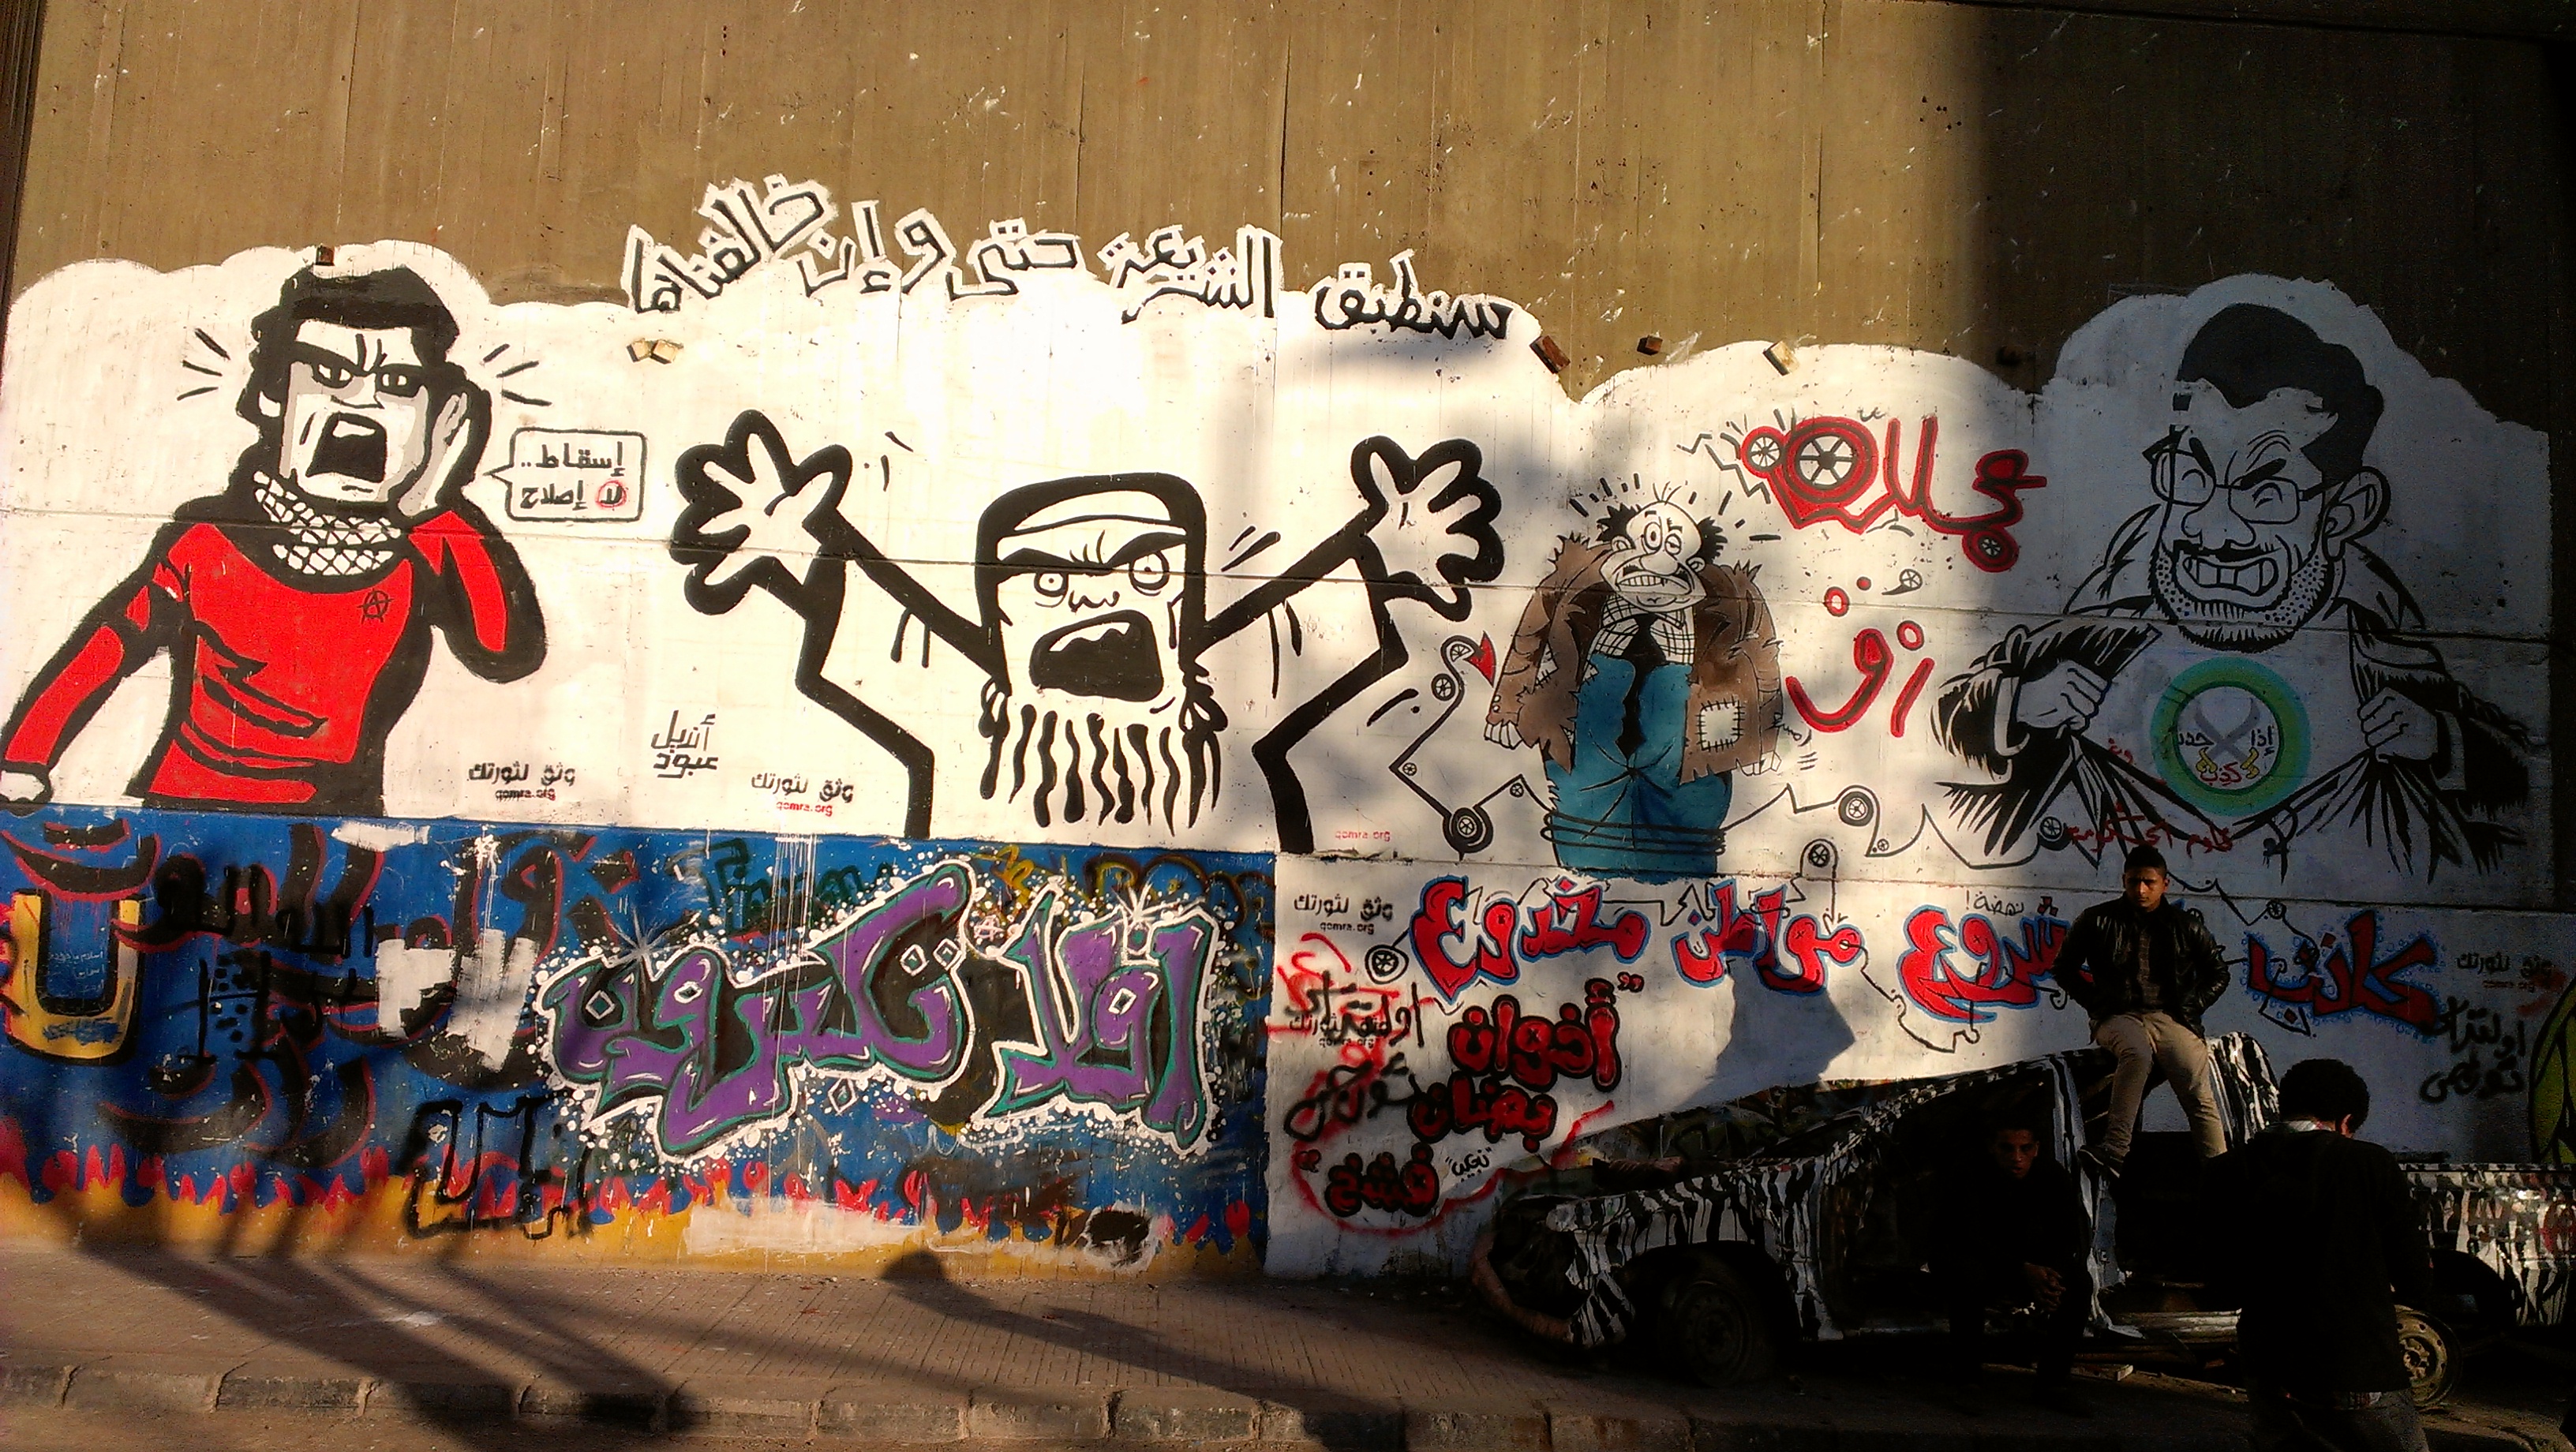 Graffiti: The Walls of Egypt – Words of action